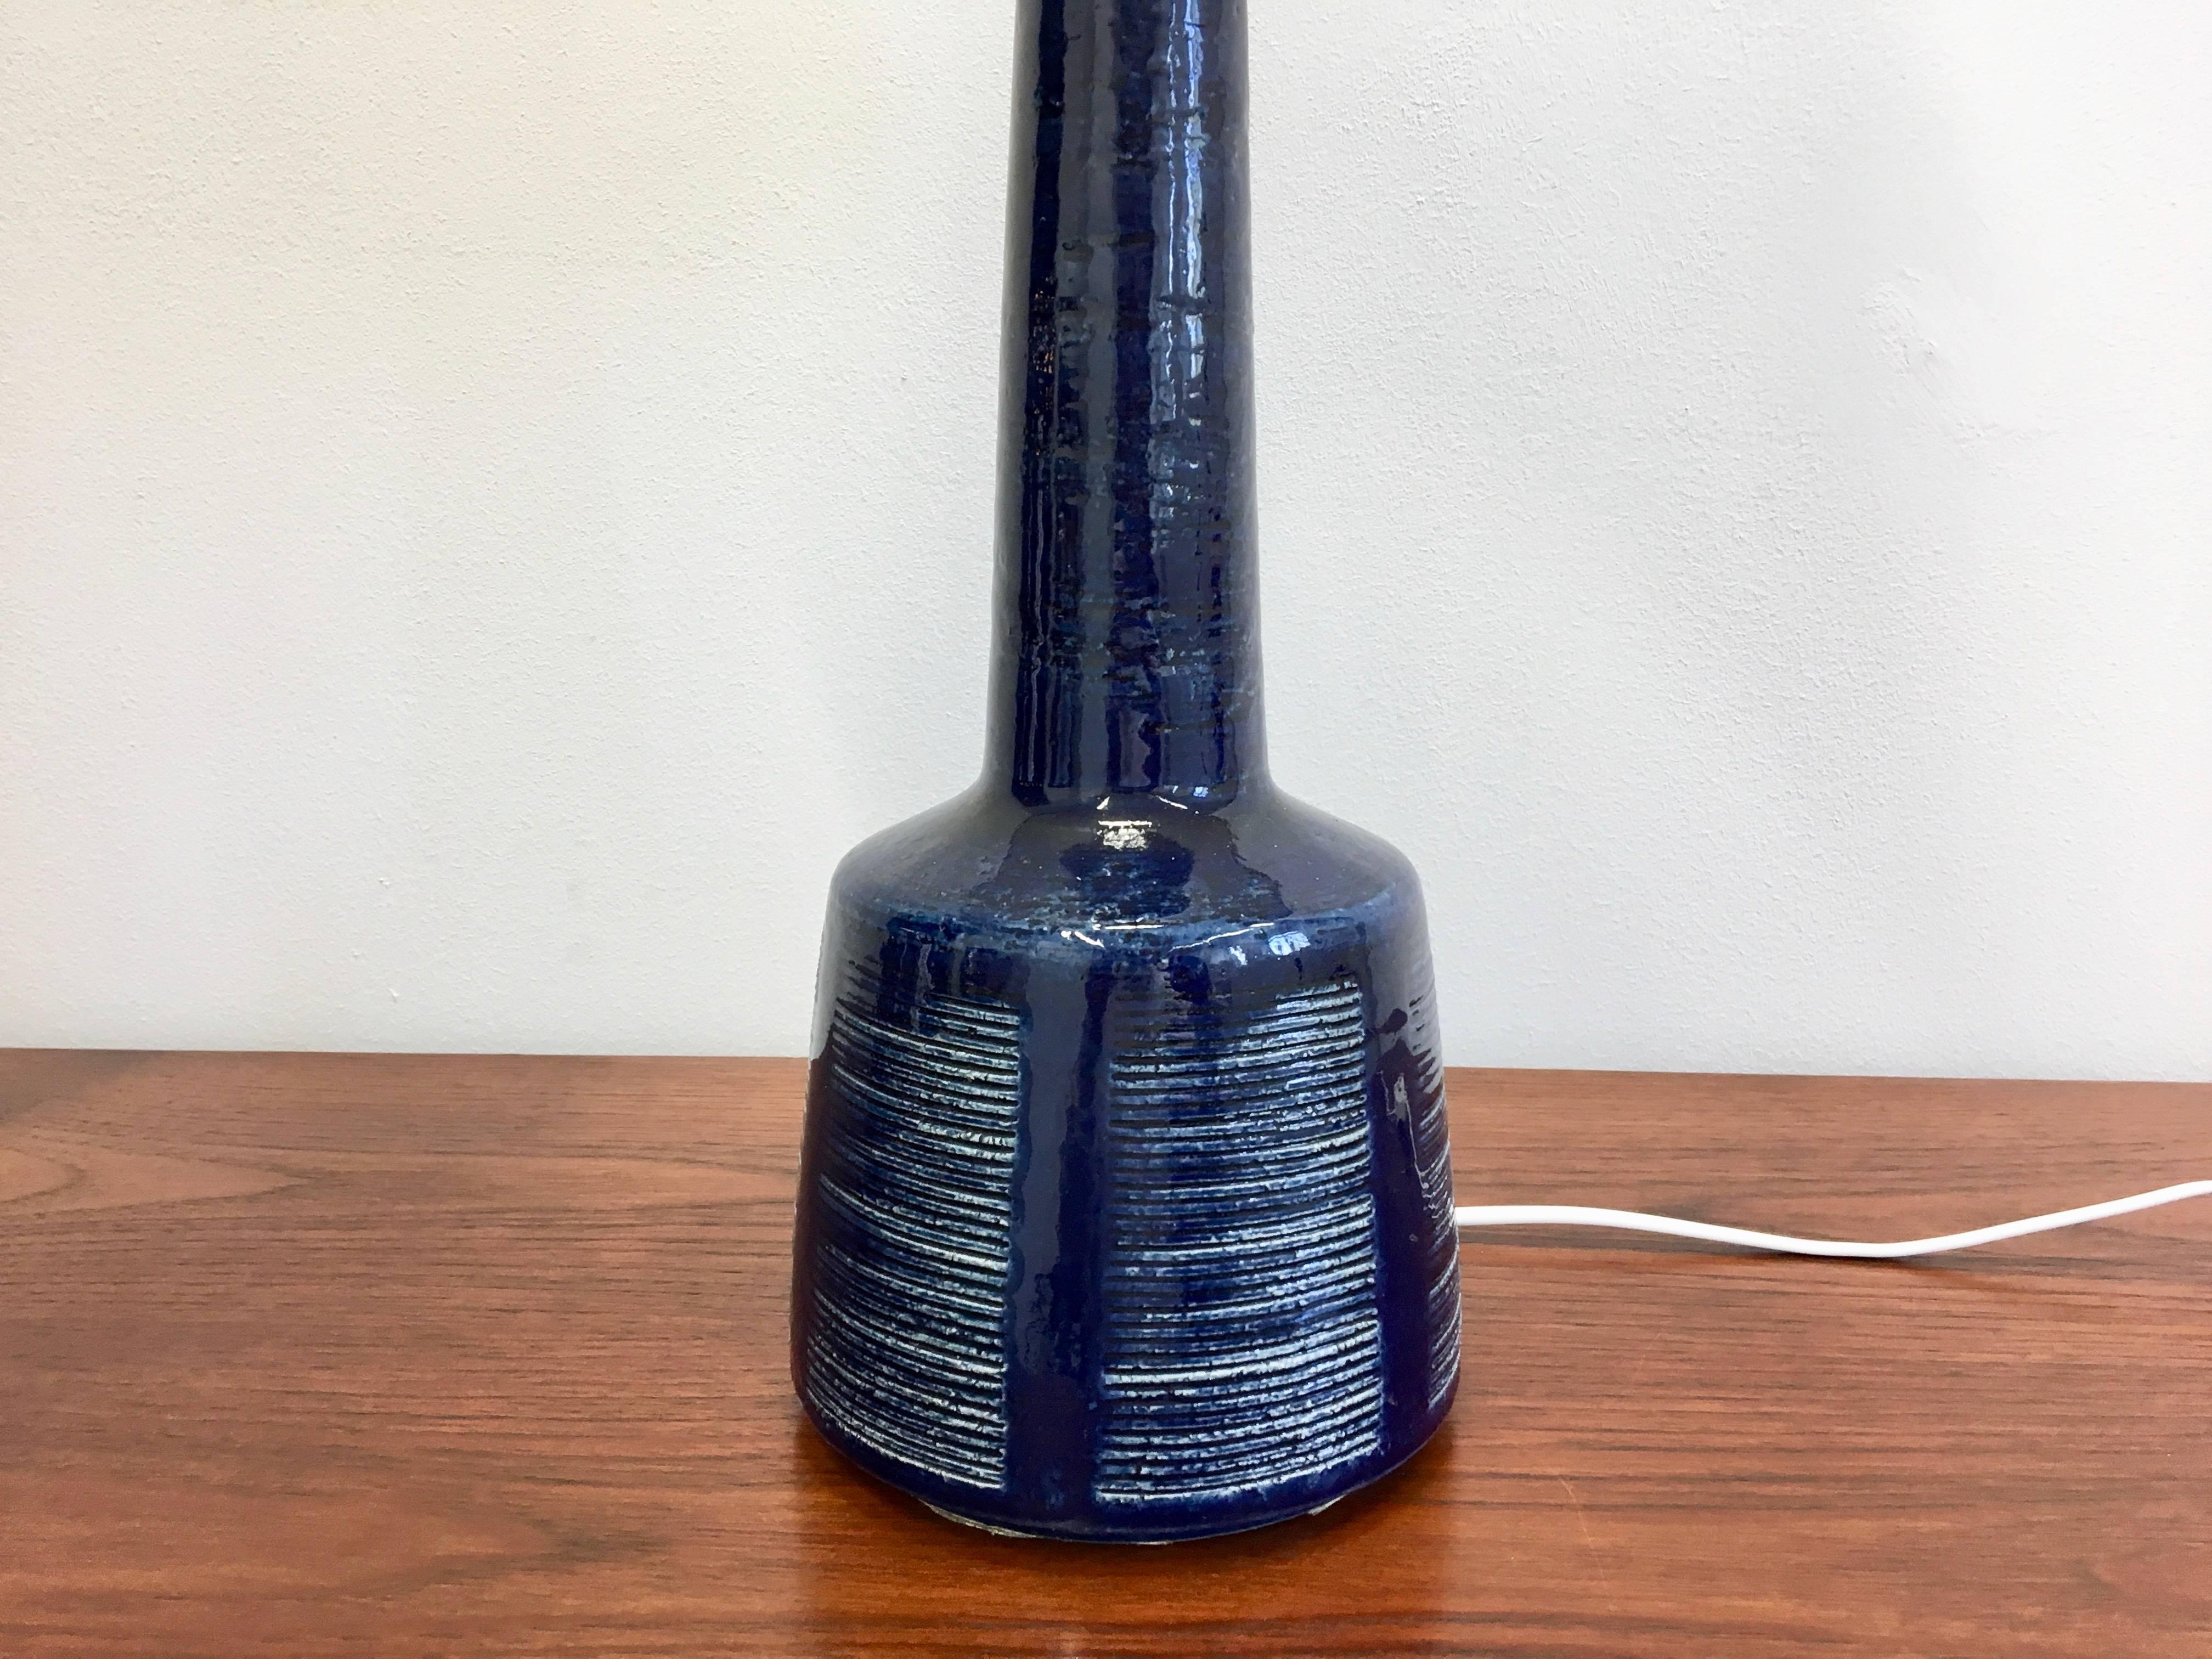 This ceramic table lamp was designed by Esben Klint and produced by Palshus in Denmark in the 1960s. The lamp is made of chamotte clay and has a dark blue glaze over a geometric pattern.
Rewired for European standard and new lampshade.